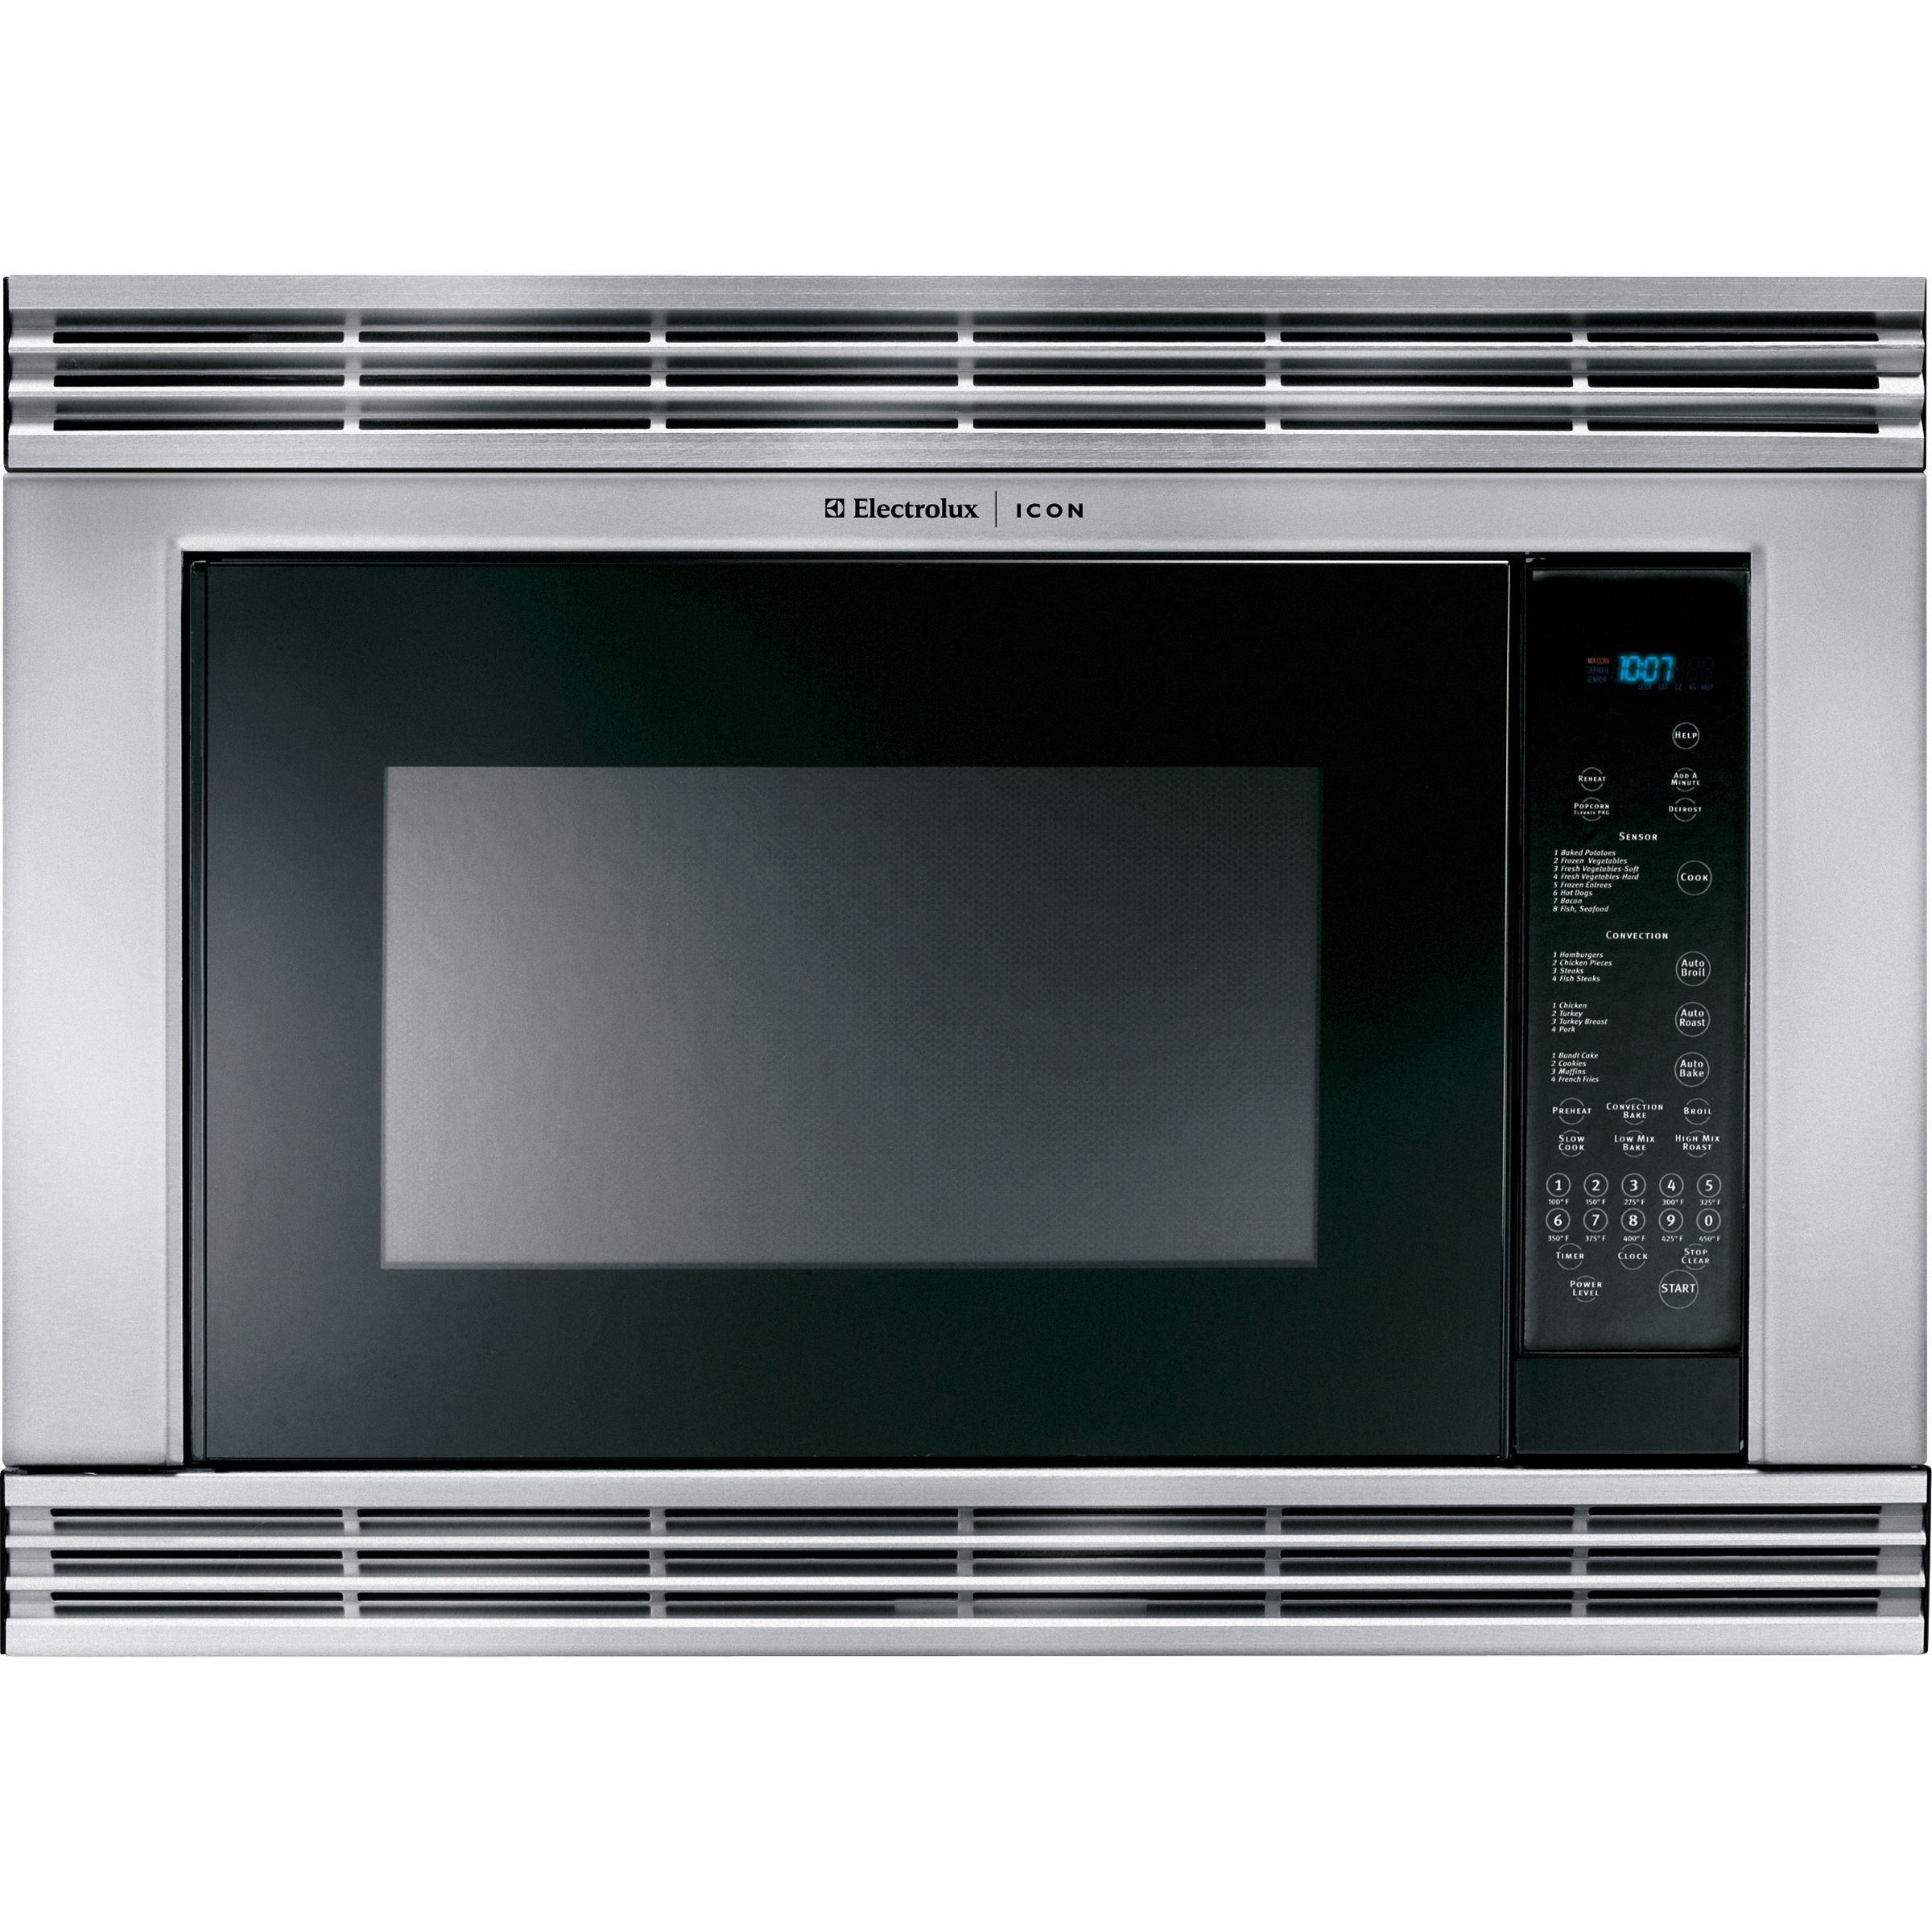 Electrolux 30 1.5 cu. ft. Built-In Convection Microwave Oven - Stainless Steel